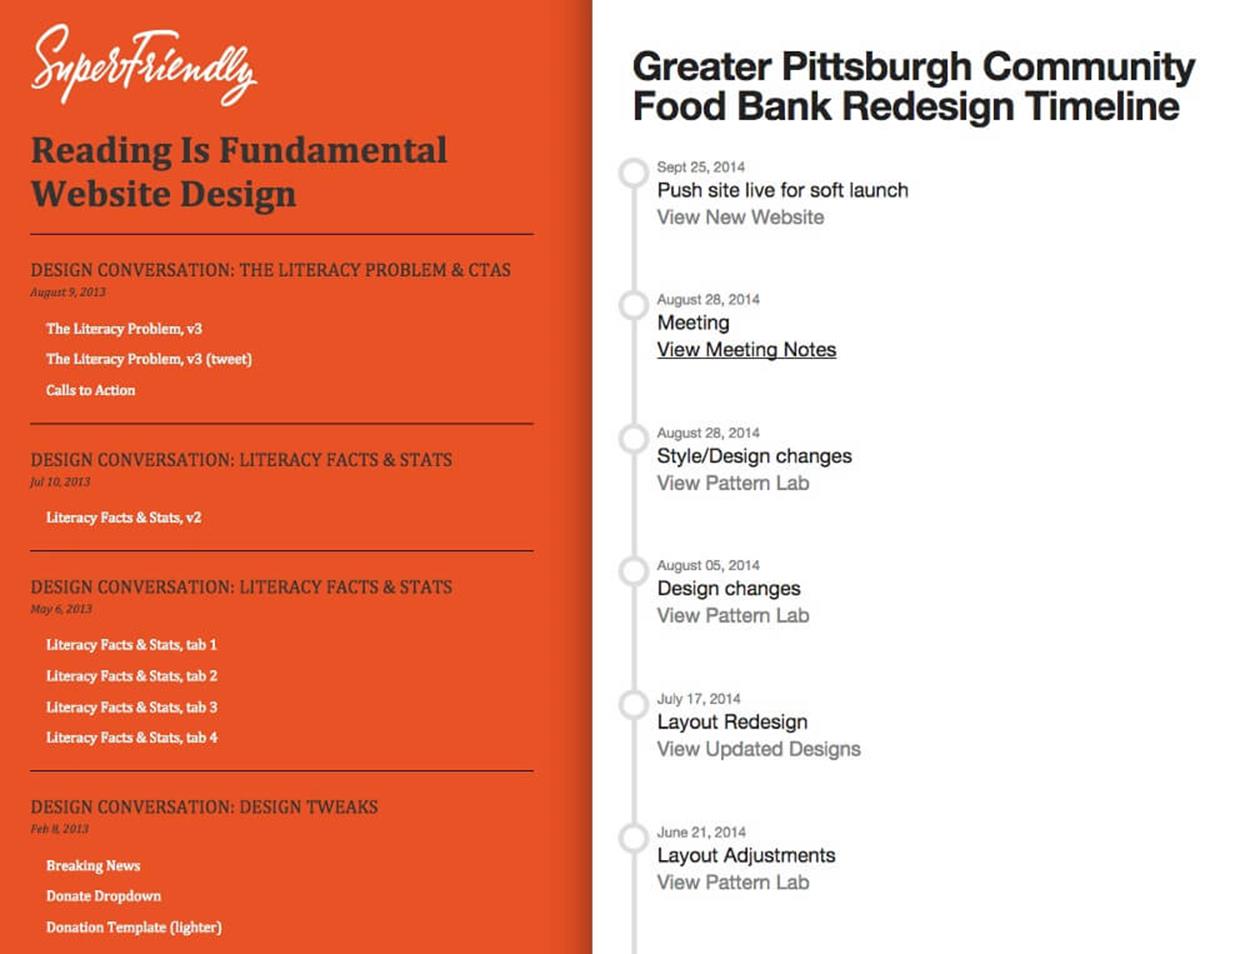 SuperFriendly’s “Reading Is Fundamental” and Brad Frost’s “Greater Pittsburgh Community Food Bank“ project hubs